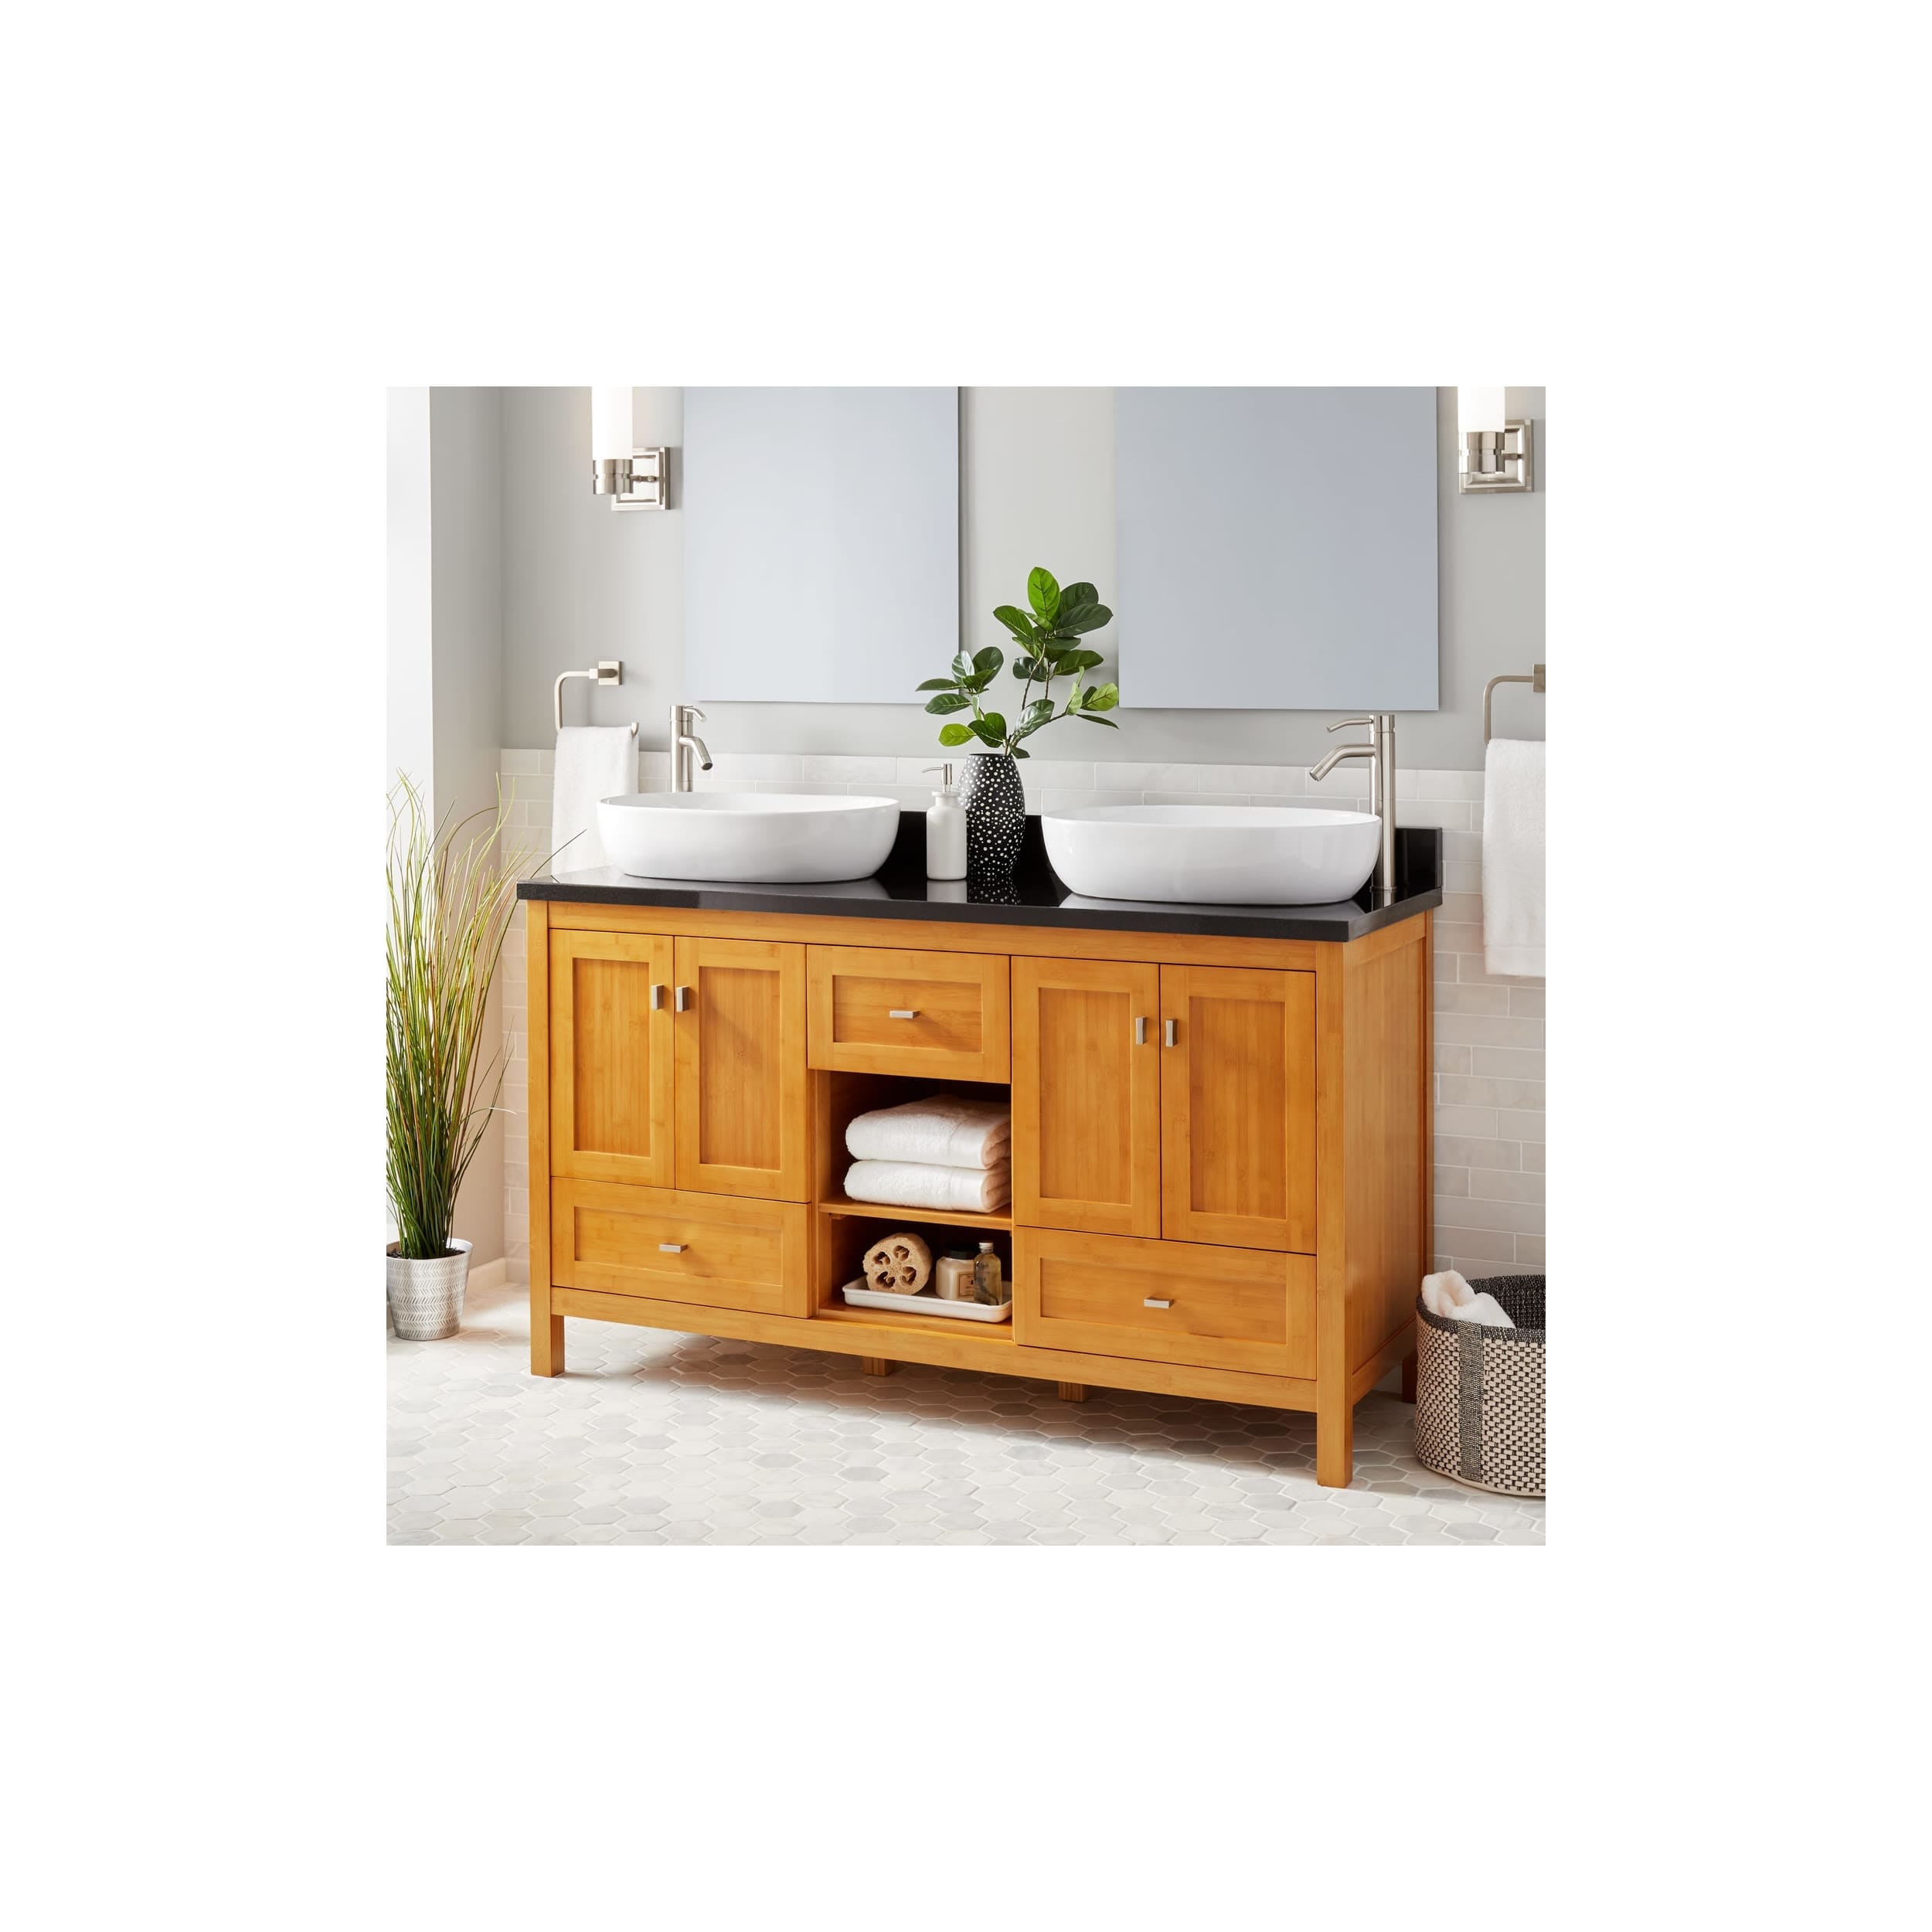 Signature Hardware 941088 Alcott 60 Double Vanity Set With Bamboo Cabinet And Stone Vanity Top Overstock 25734667